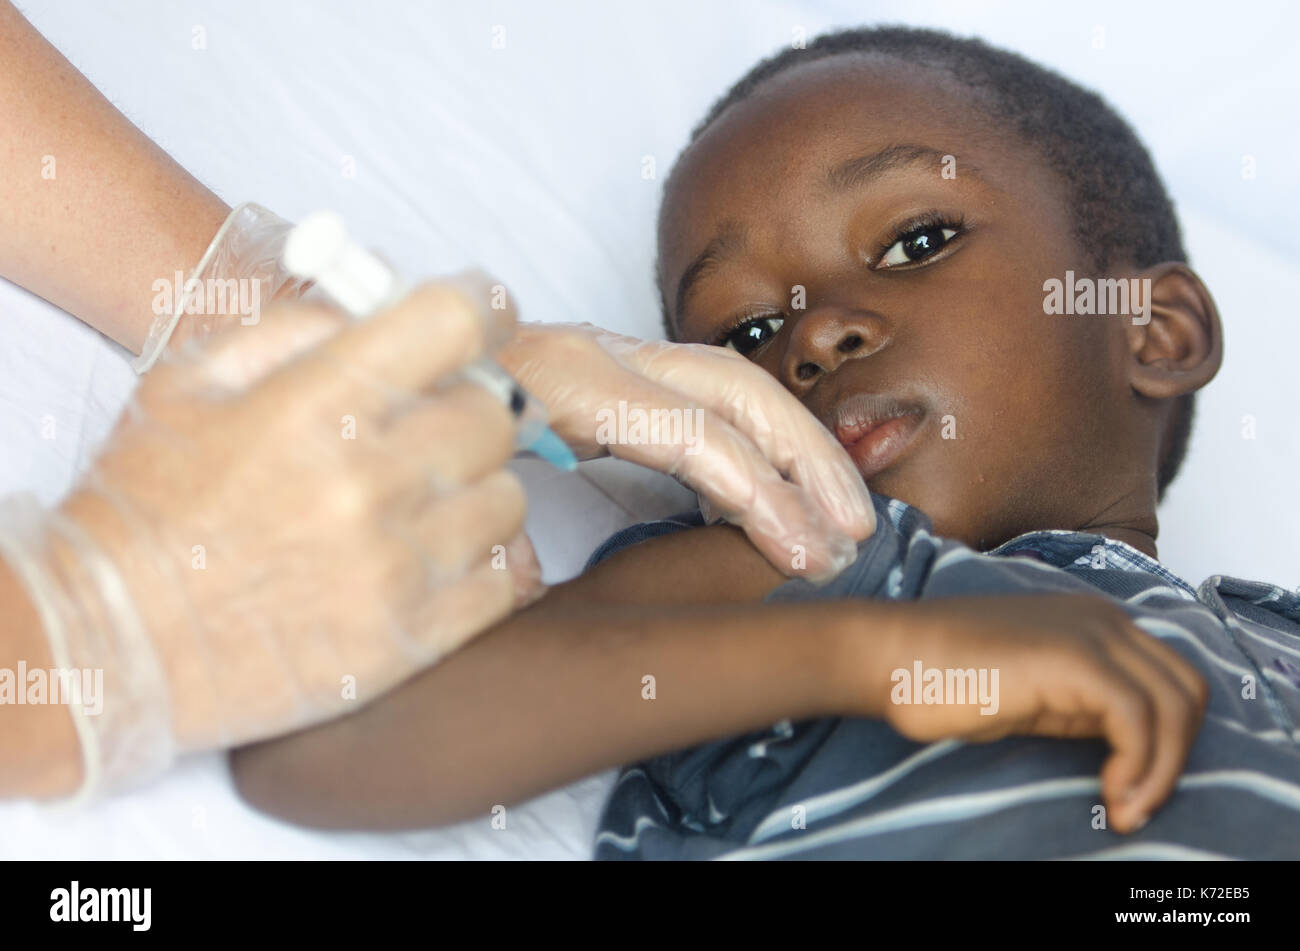 Sad African boy is worried about getting an injection for his health as a vaccination Stock Photo